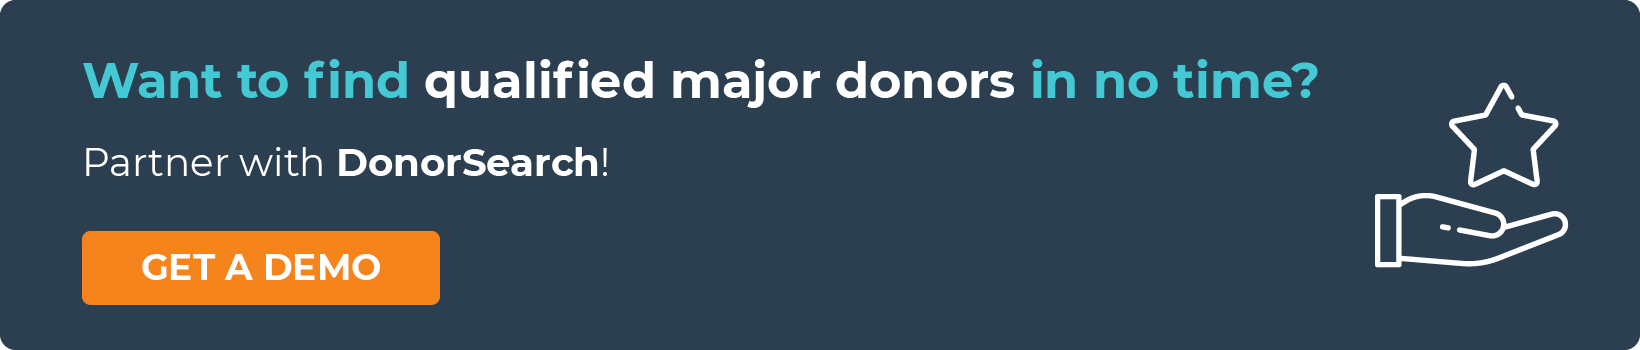 Get a demo to learn how to find more major donors with DonorSearch. 